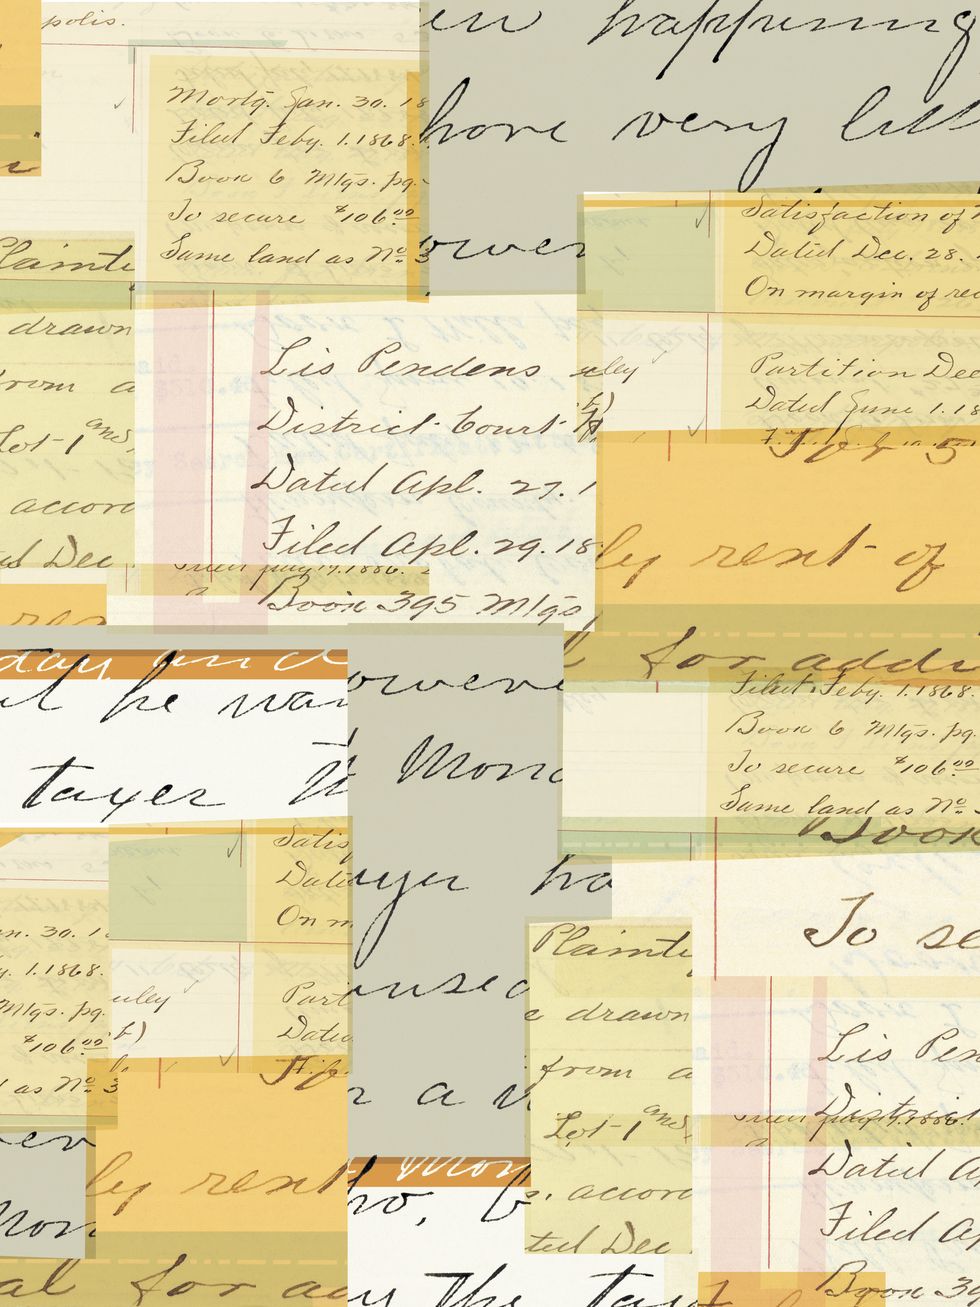 handwritten notes and letters overlaying each other